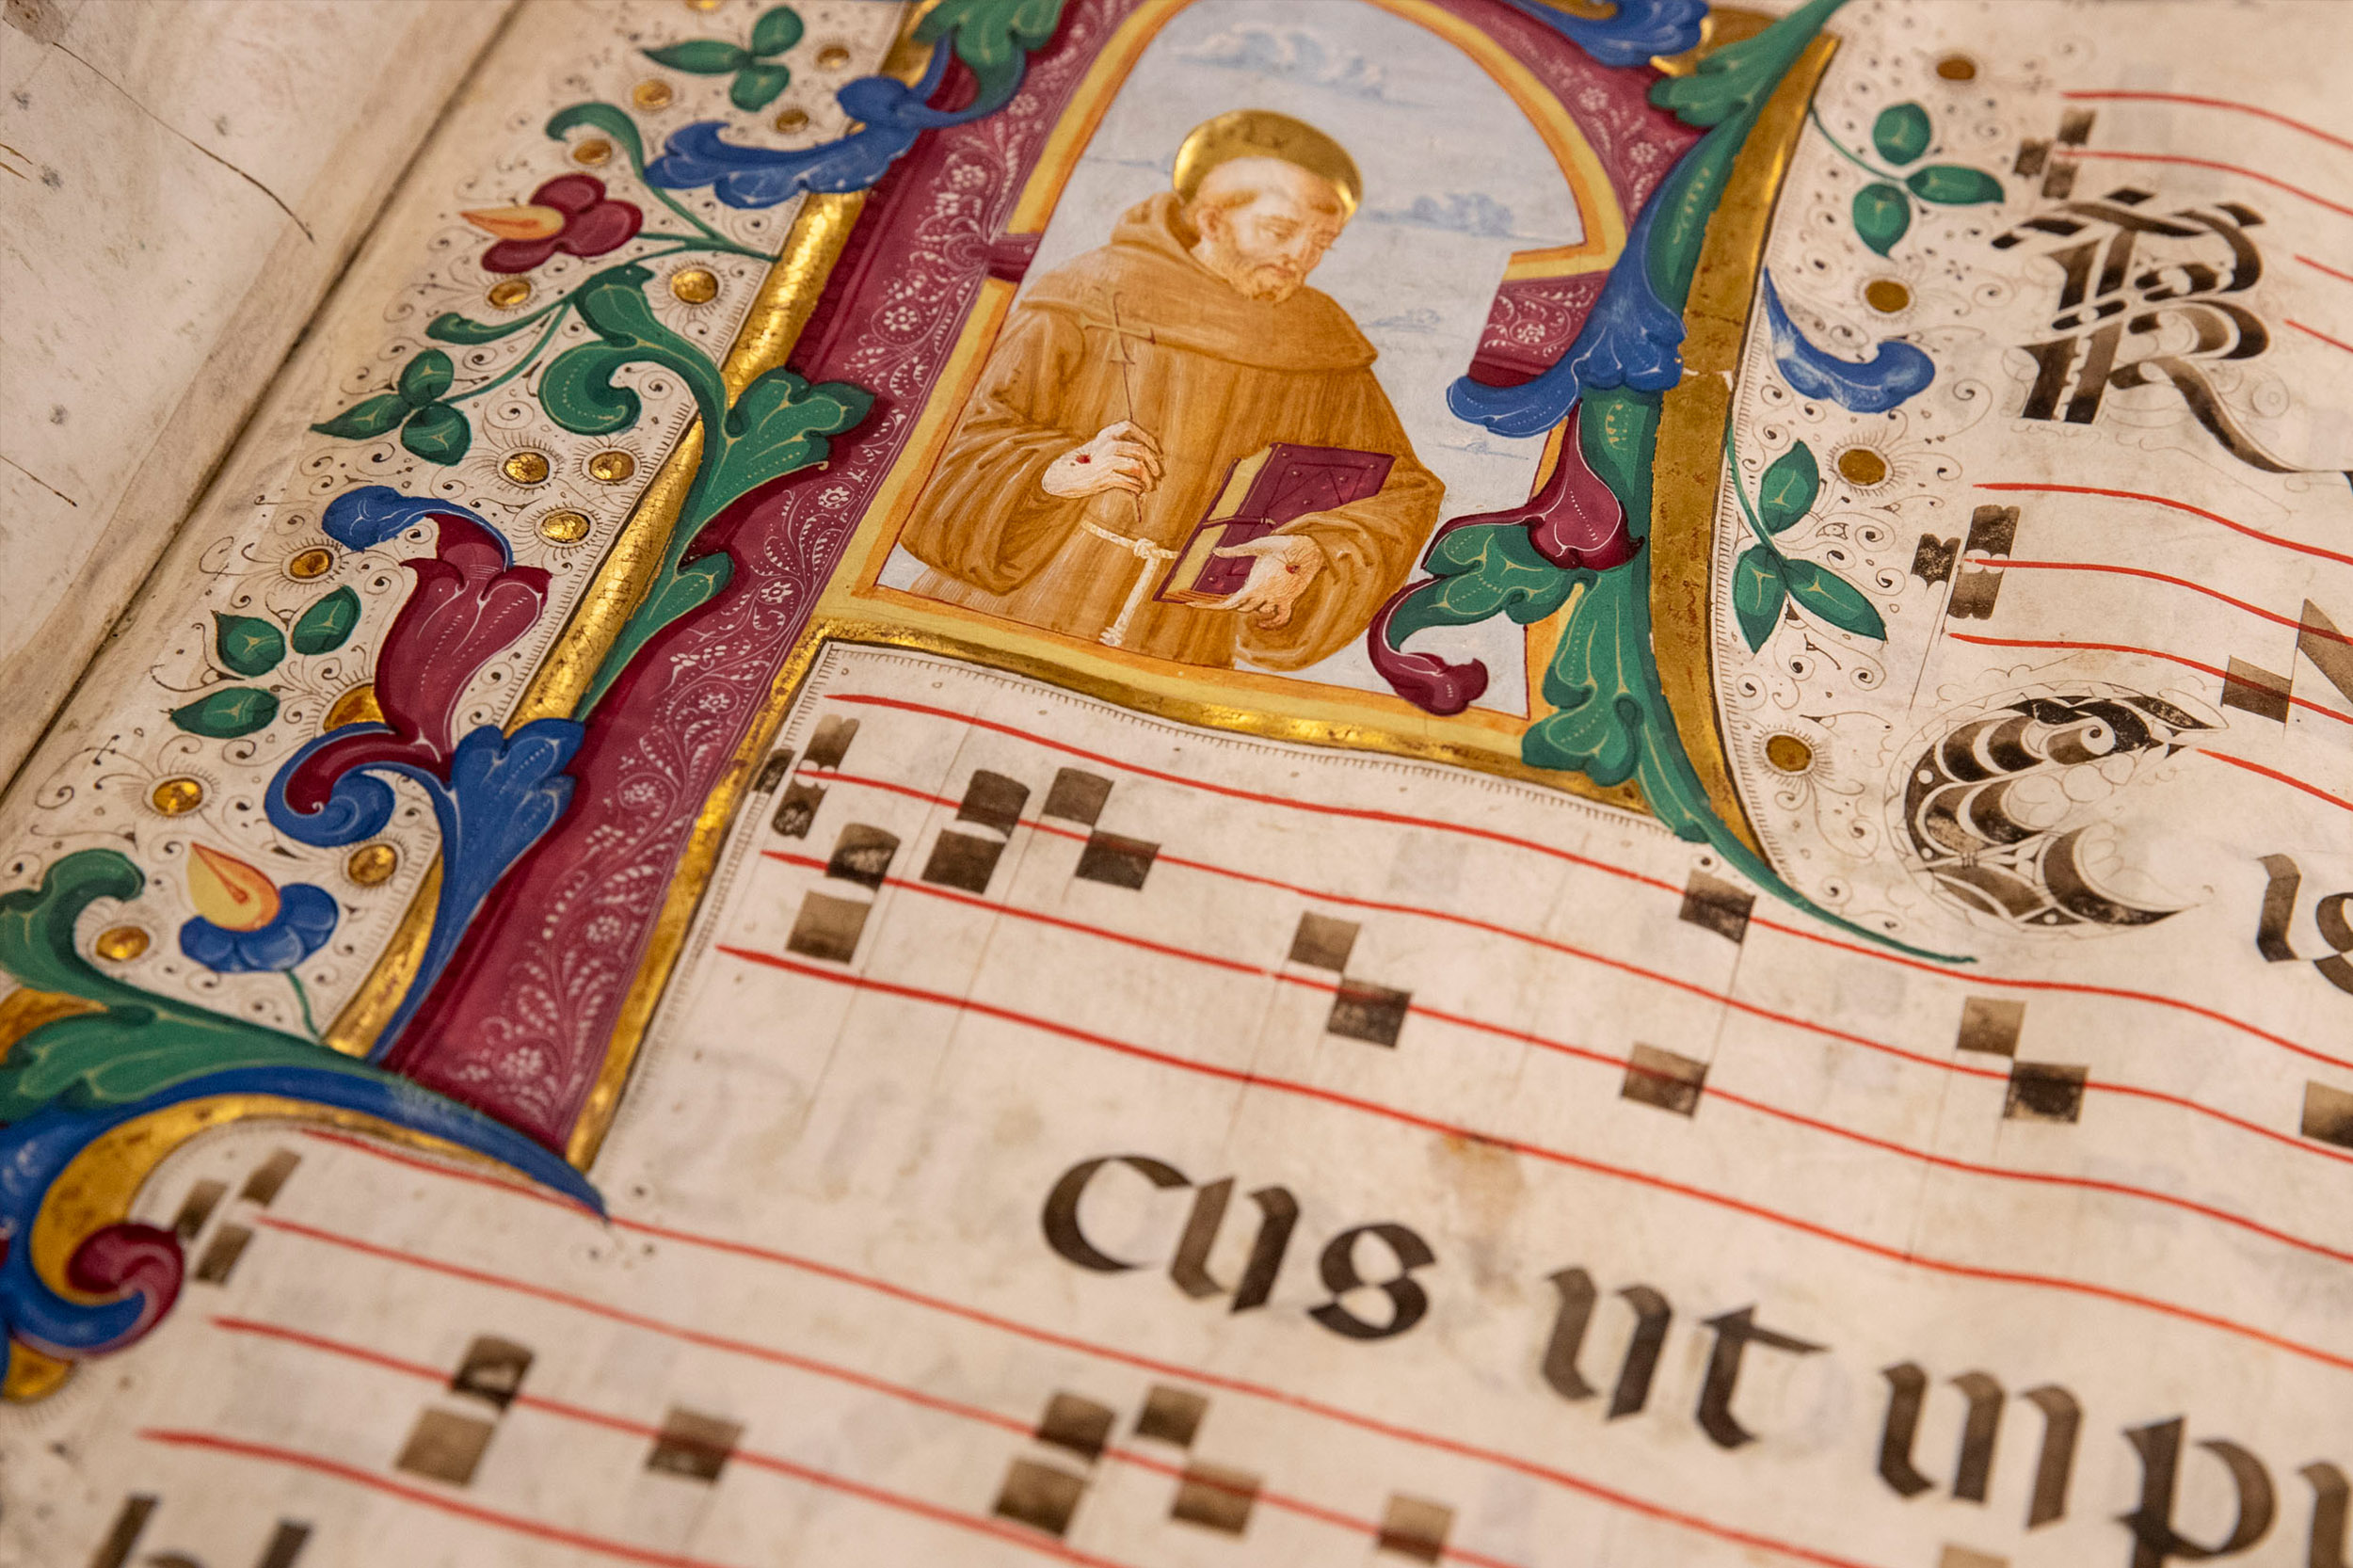 Up close view of an illustration of a monk holding a book 